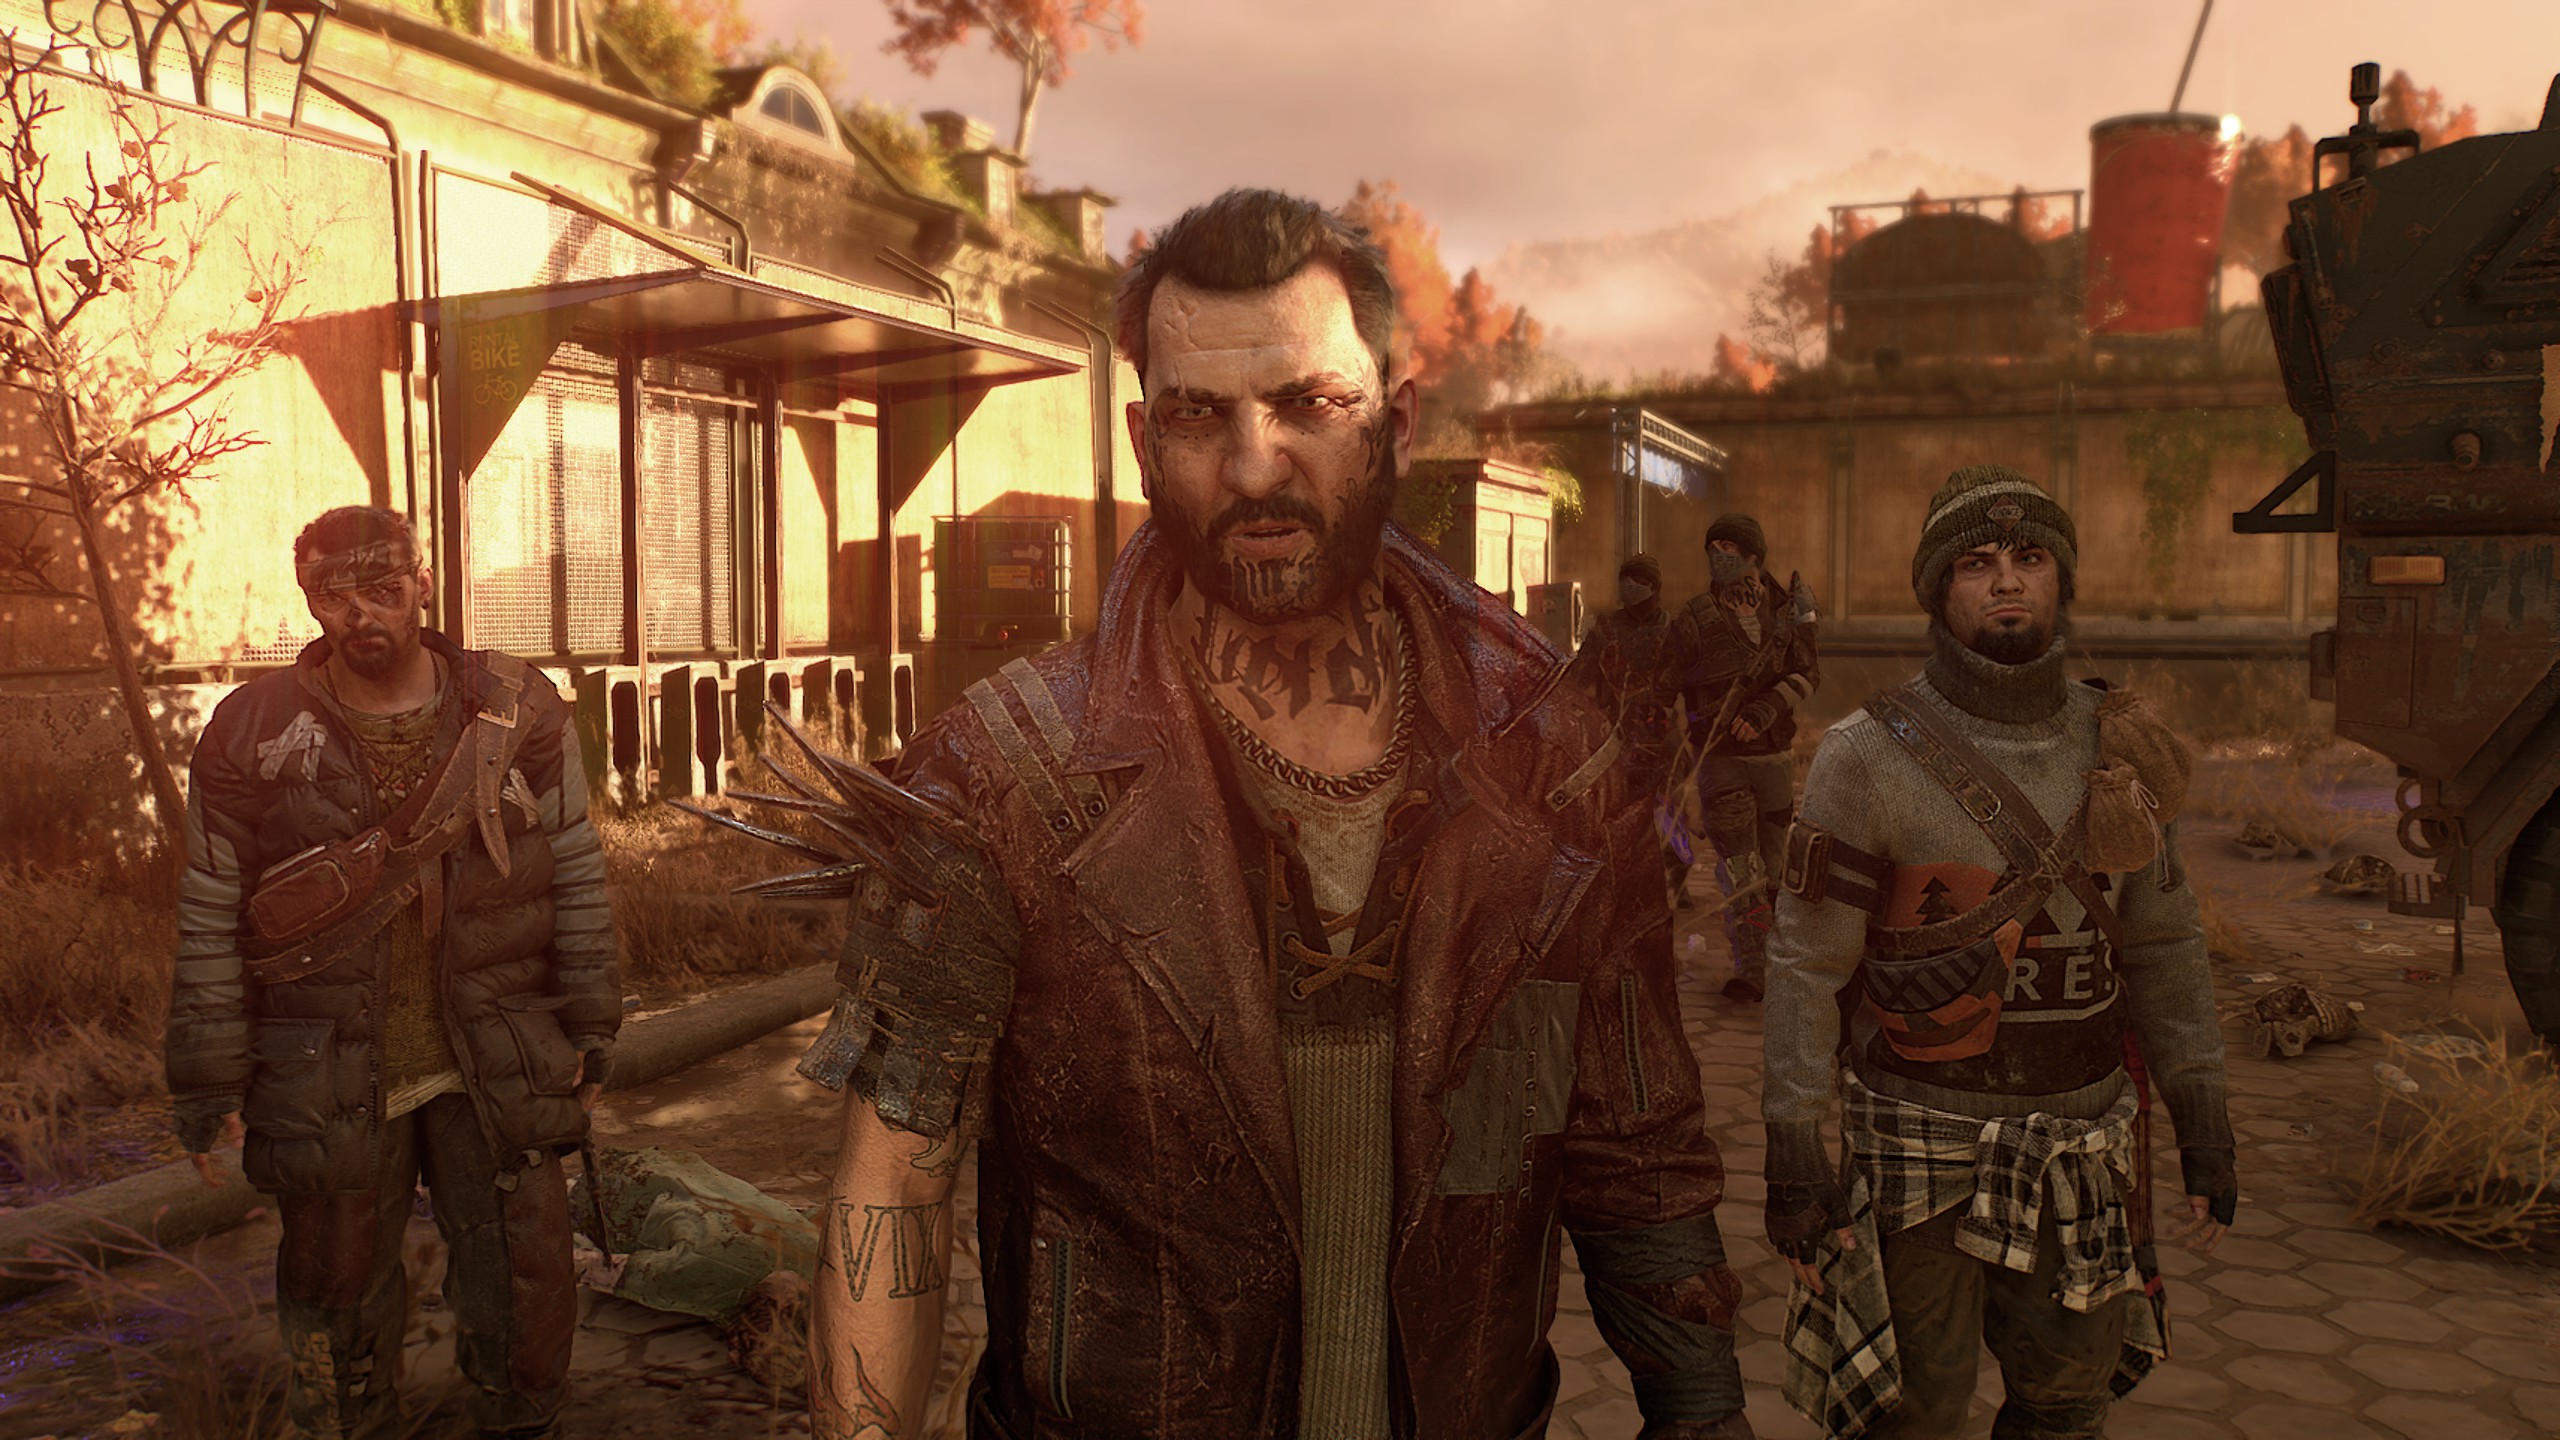 Major ‘Dying Light 2’ update improves the game’s ending sequences